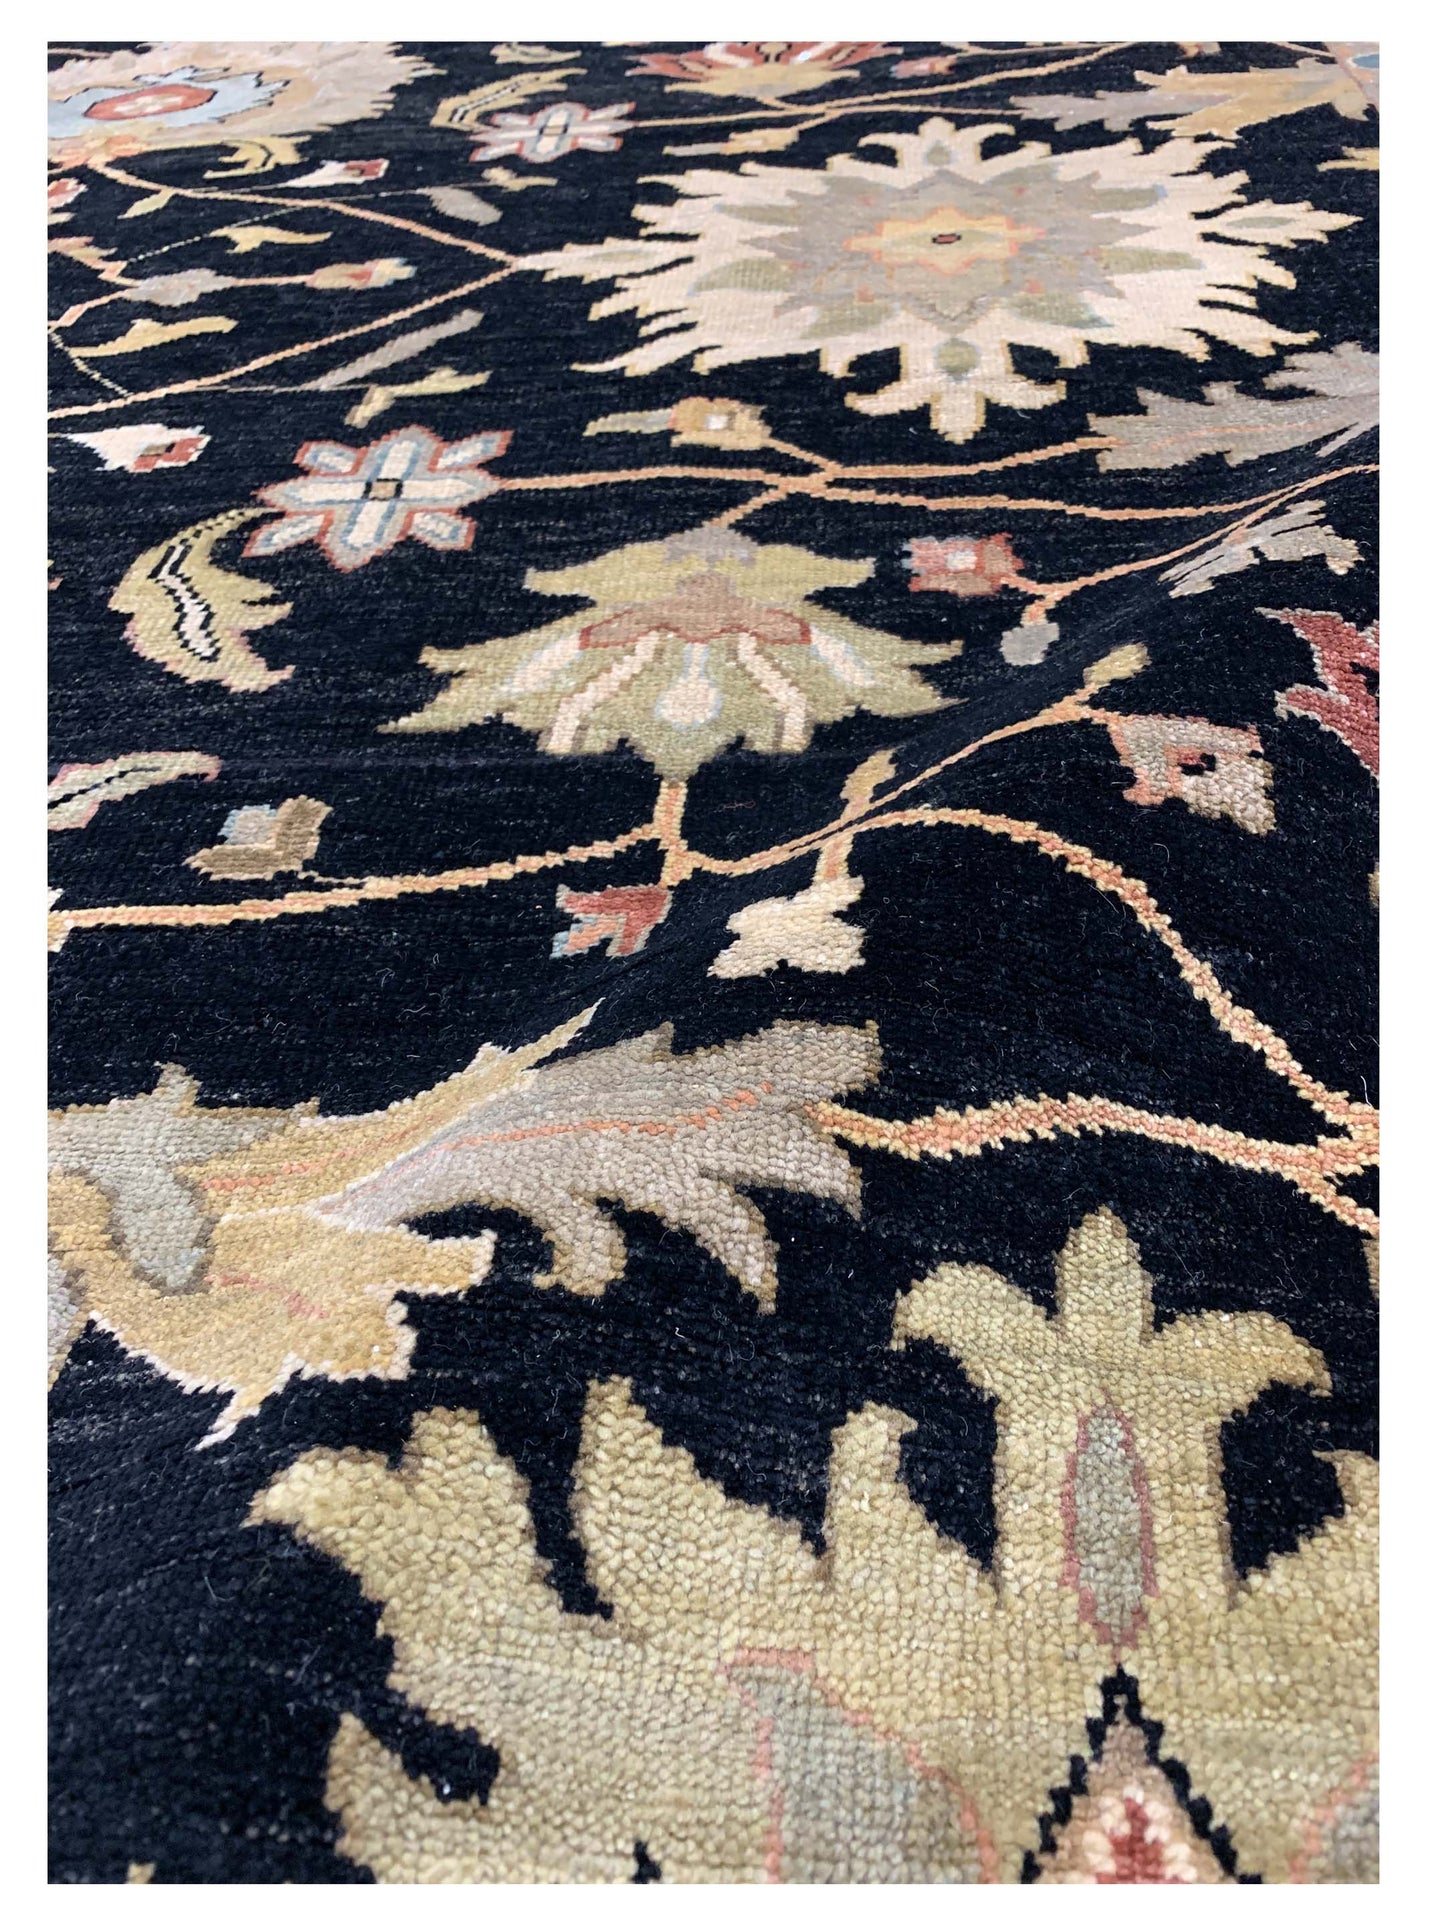 Artisan Cameron  Black Gold Traditional Knotted Rug